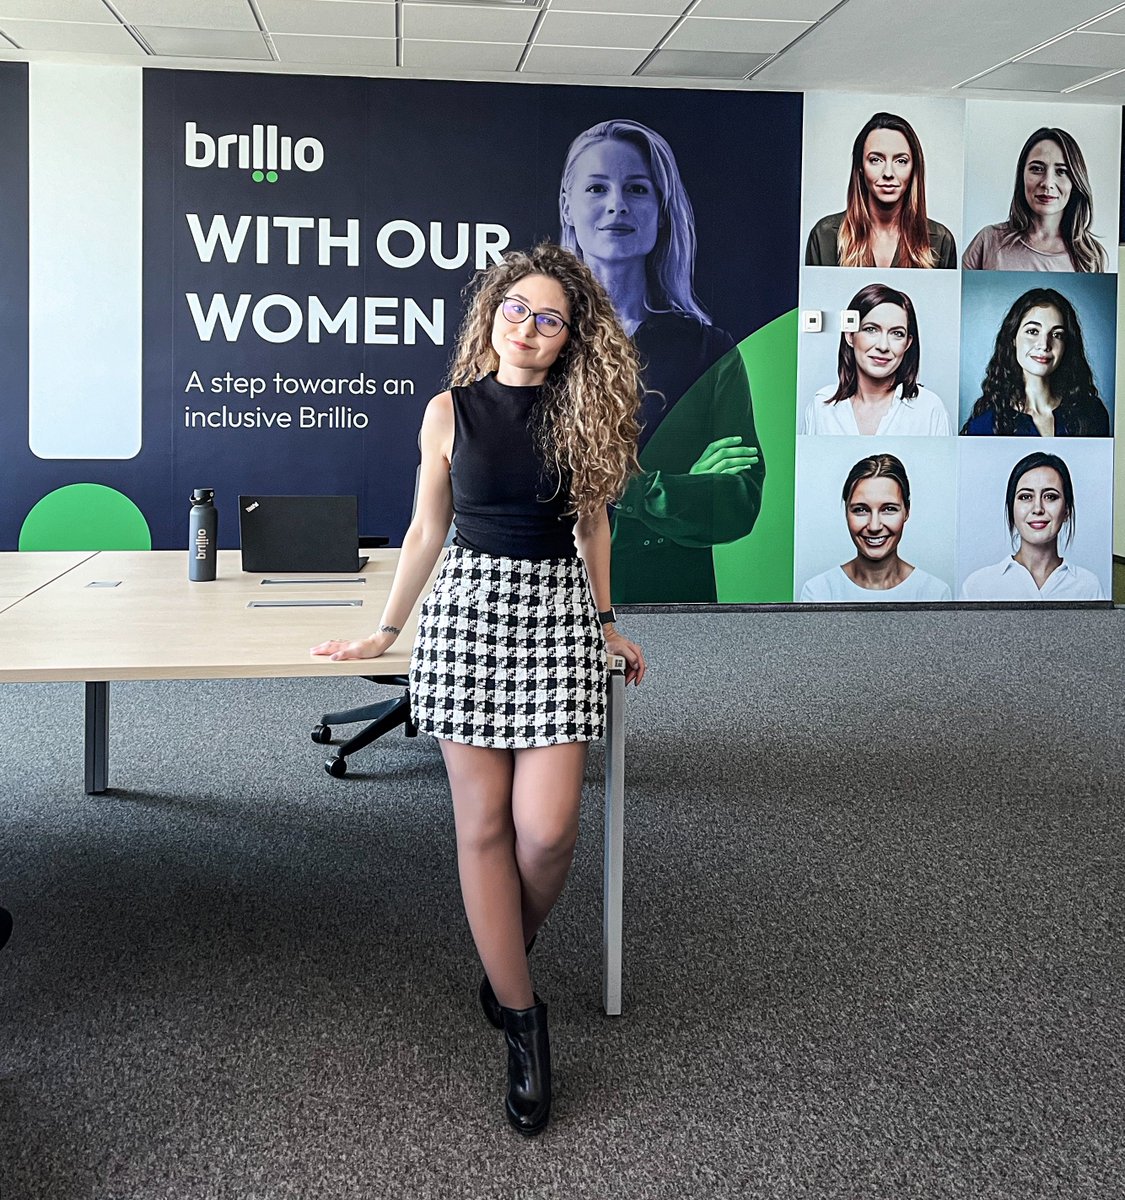 Meet Ioana, our brilliant BI analyst who brings a unique blend of expertise, teamwork, and a winning spirit to our team: 'My journey was profoundly shaped by the incredible people who welcomed me into the BI Team.' Ioana Atomei | Data Analyst #BrilliansSpeak #BrillioRomania